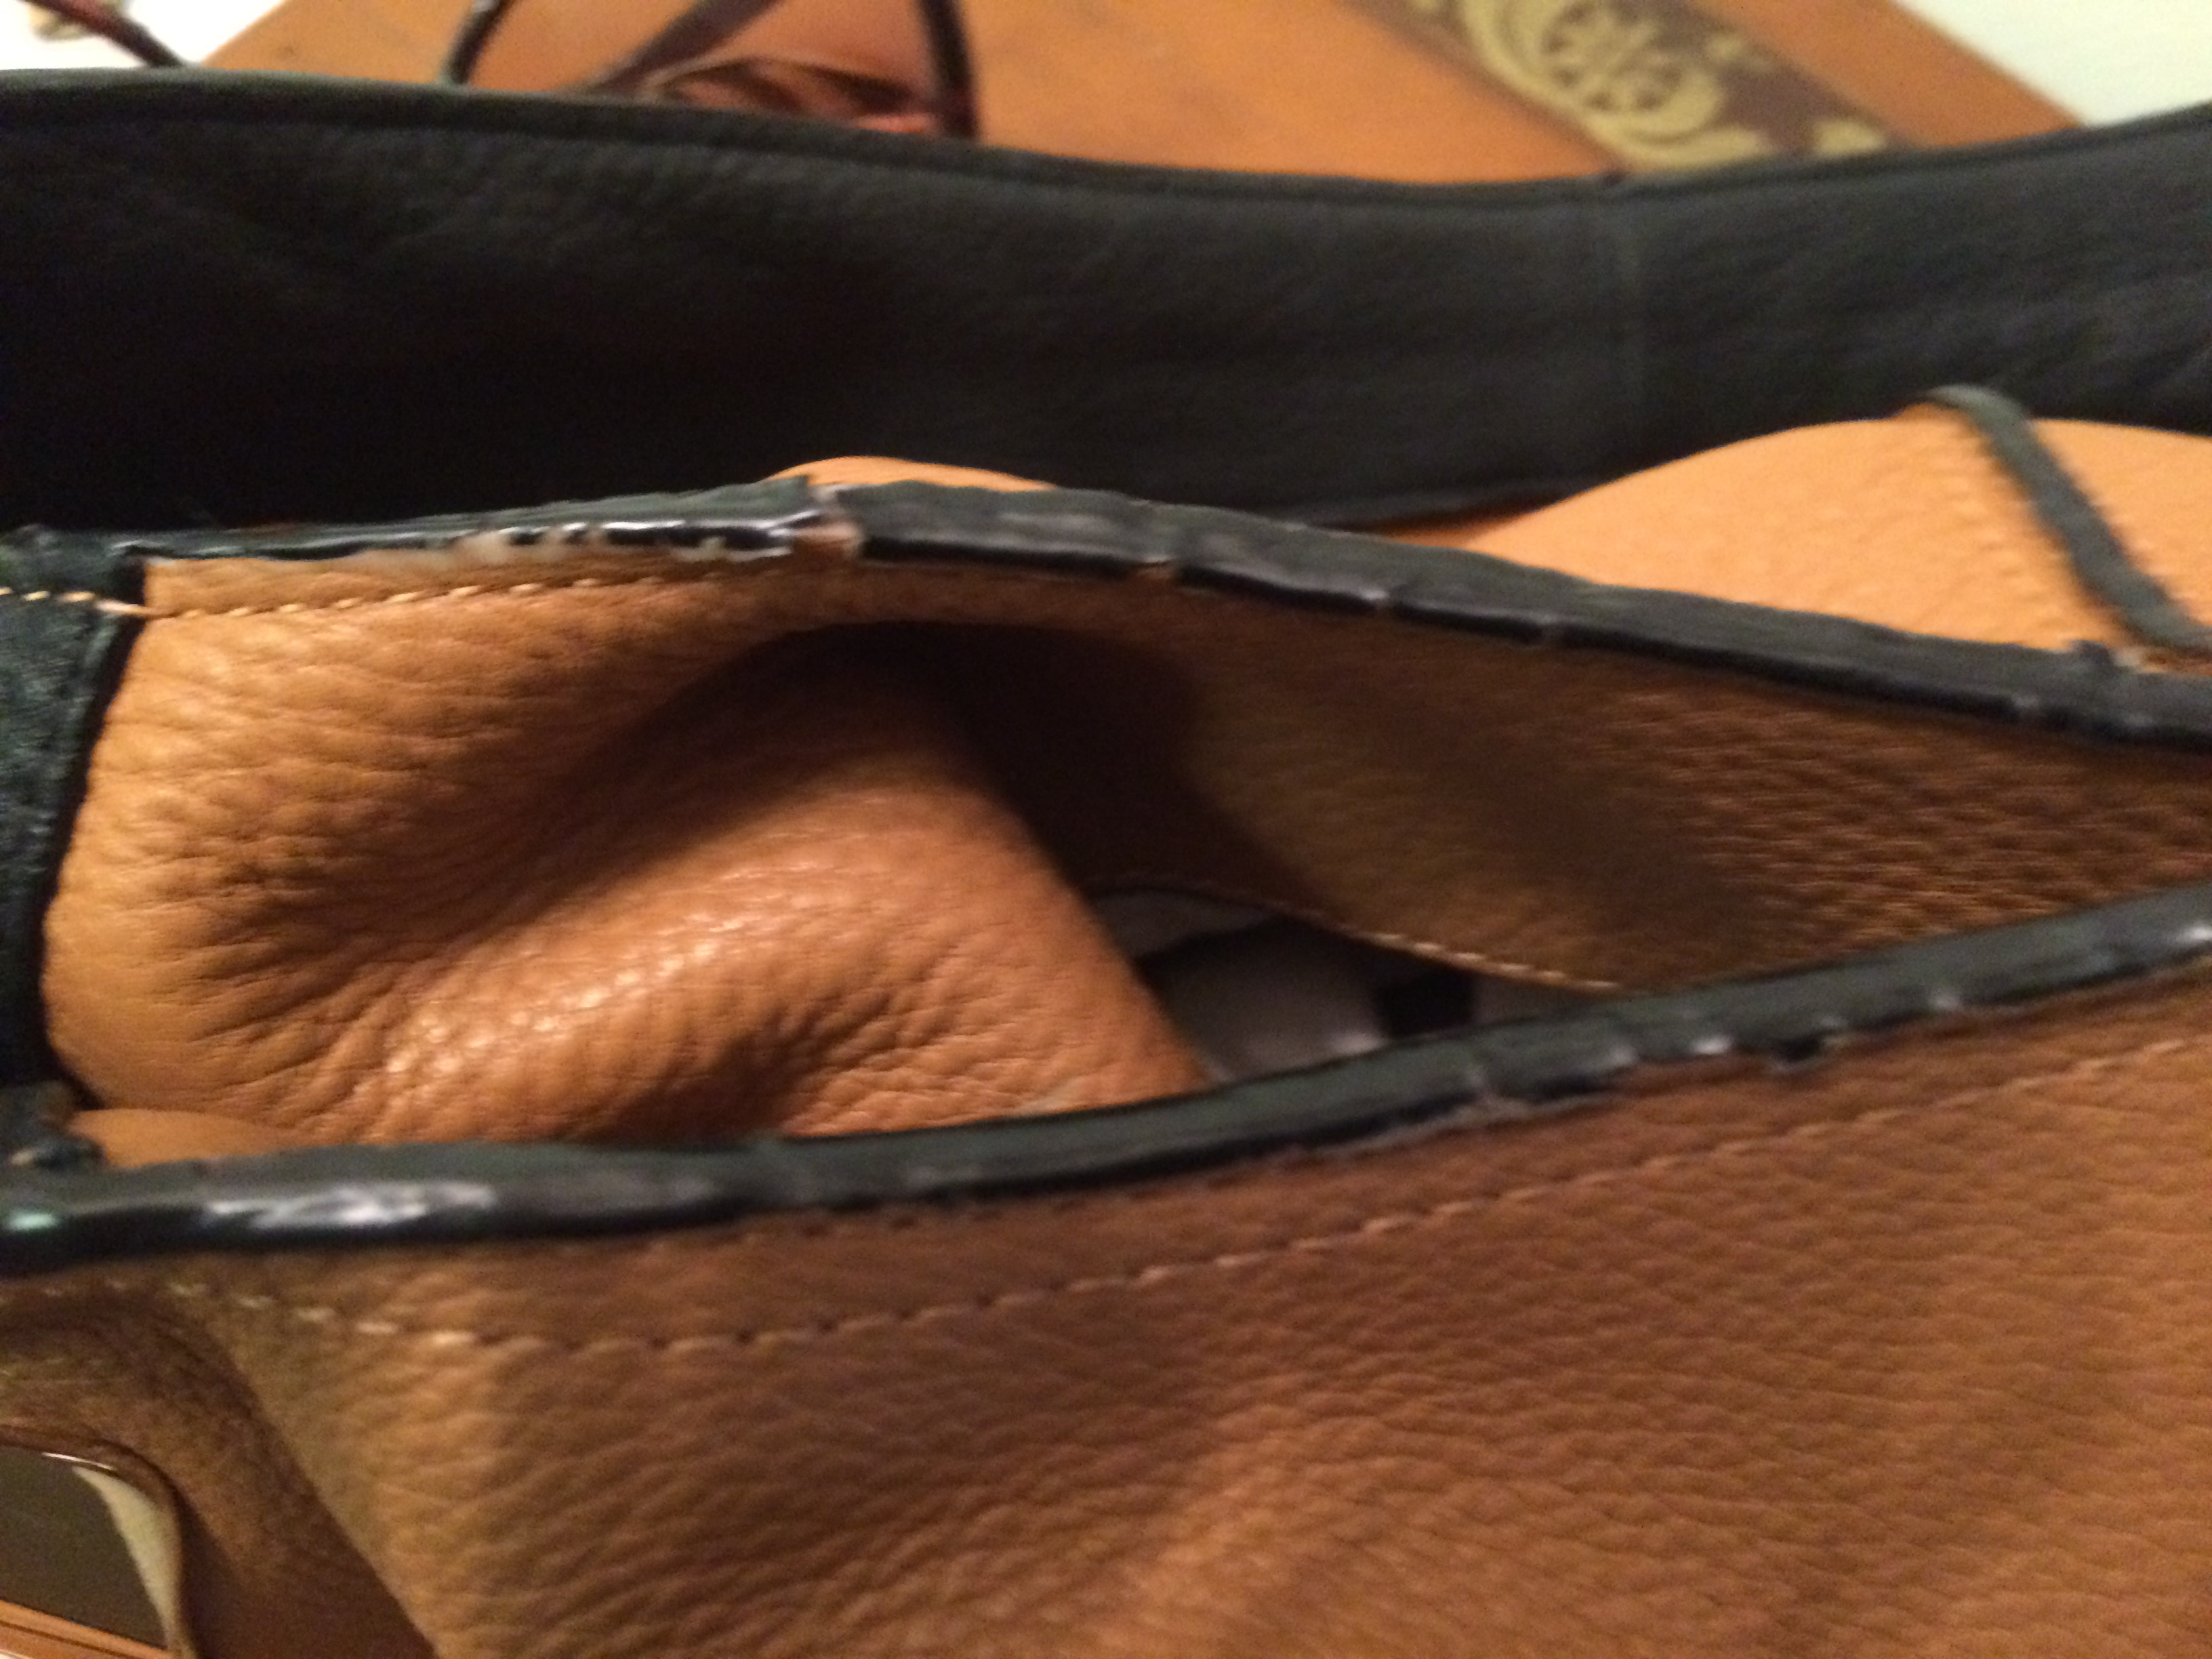 More disintegrating "leather" in a new Halston bag.